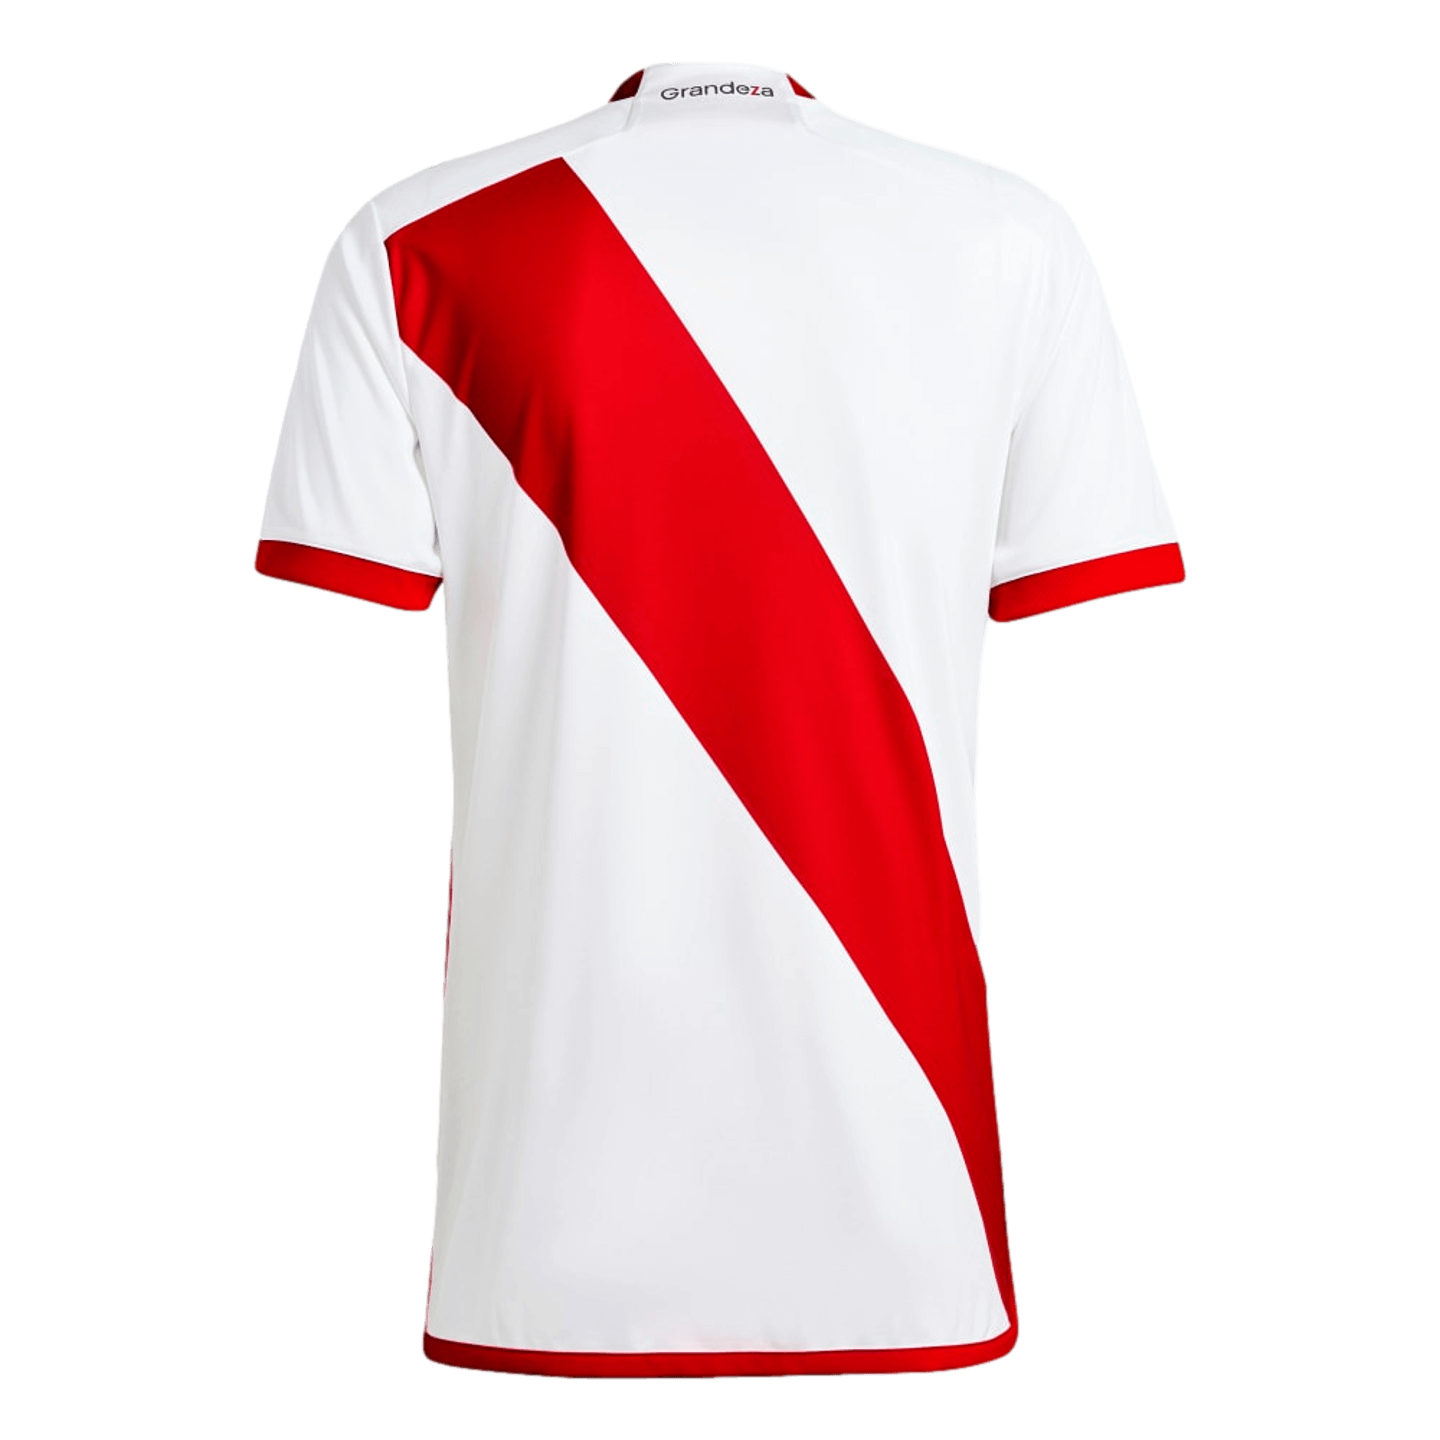 Adidas River Plate 23/24 Home Jersey